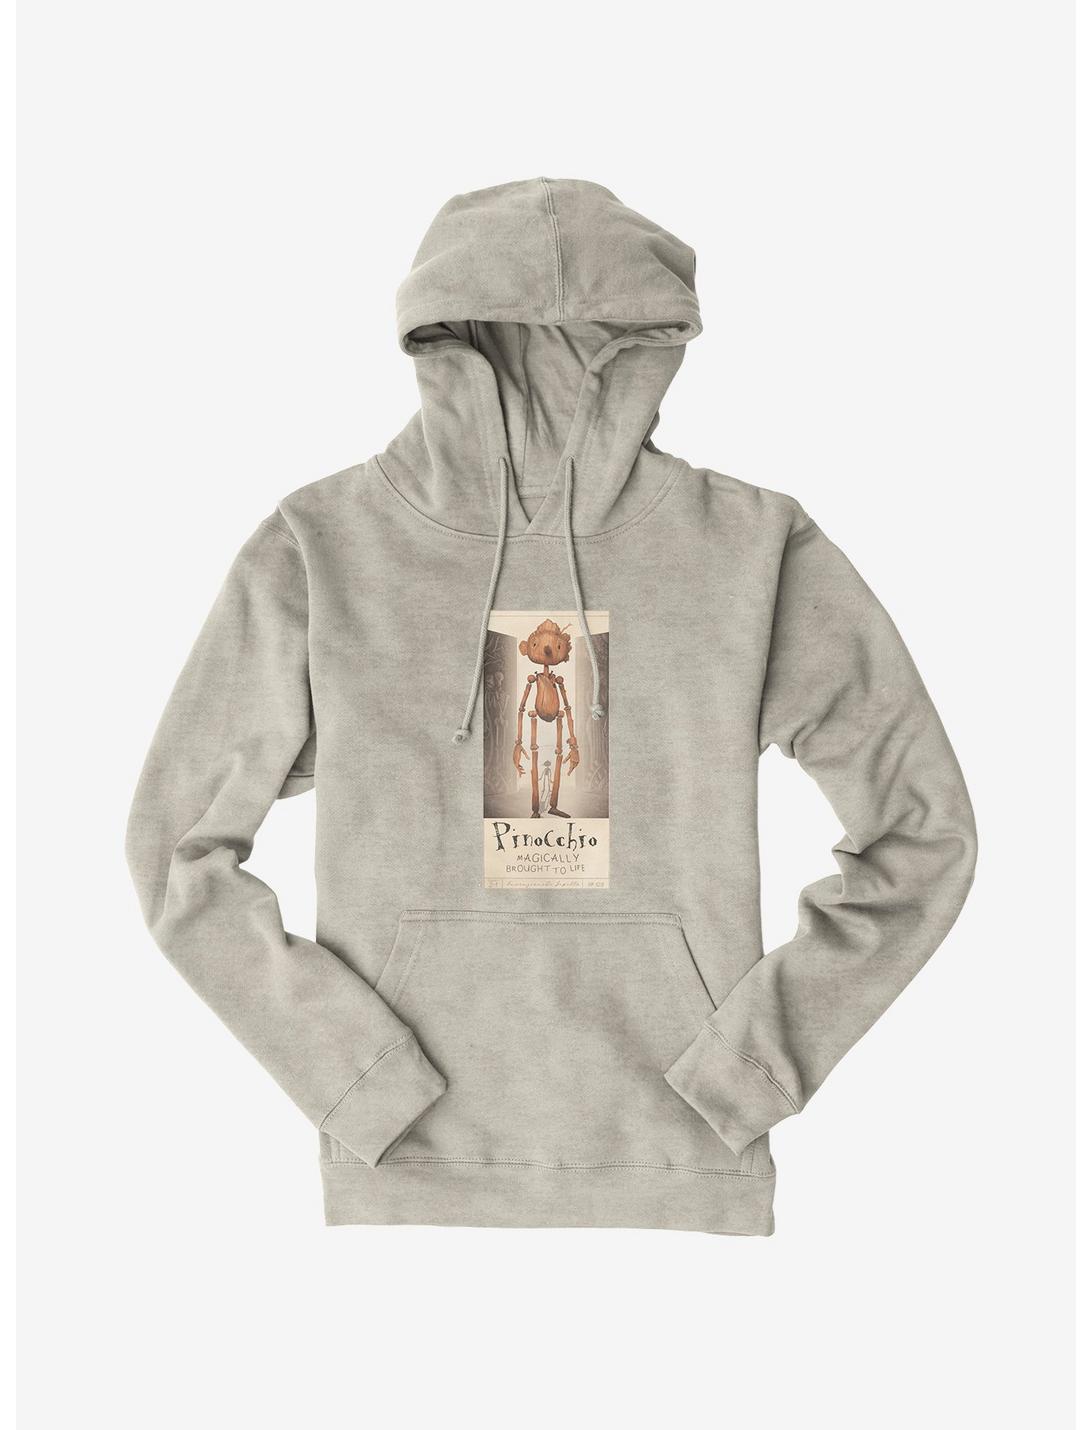 Netflix Pinocchio Magically Brought To Life Hoodie, , hi-res